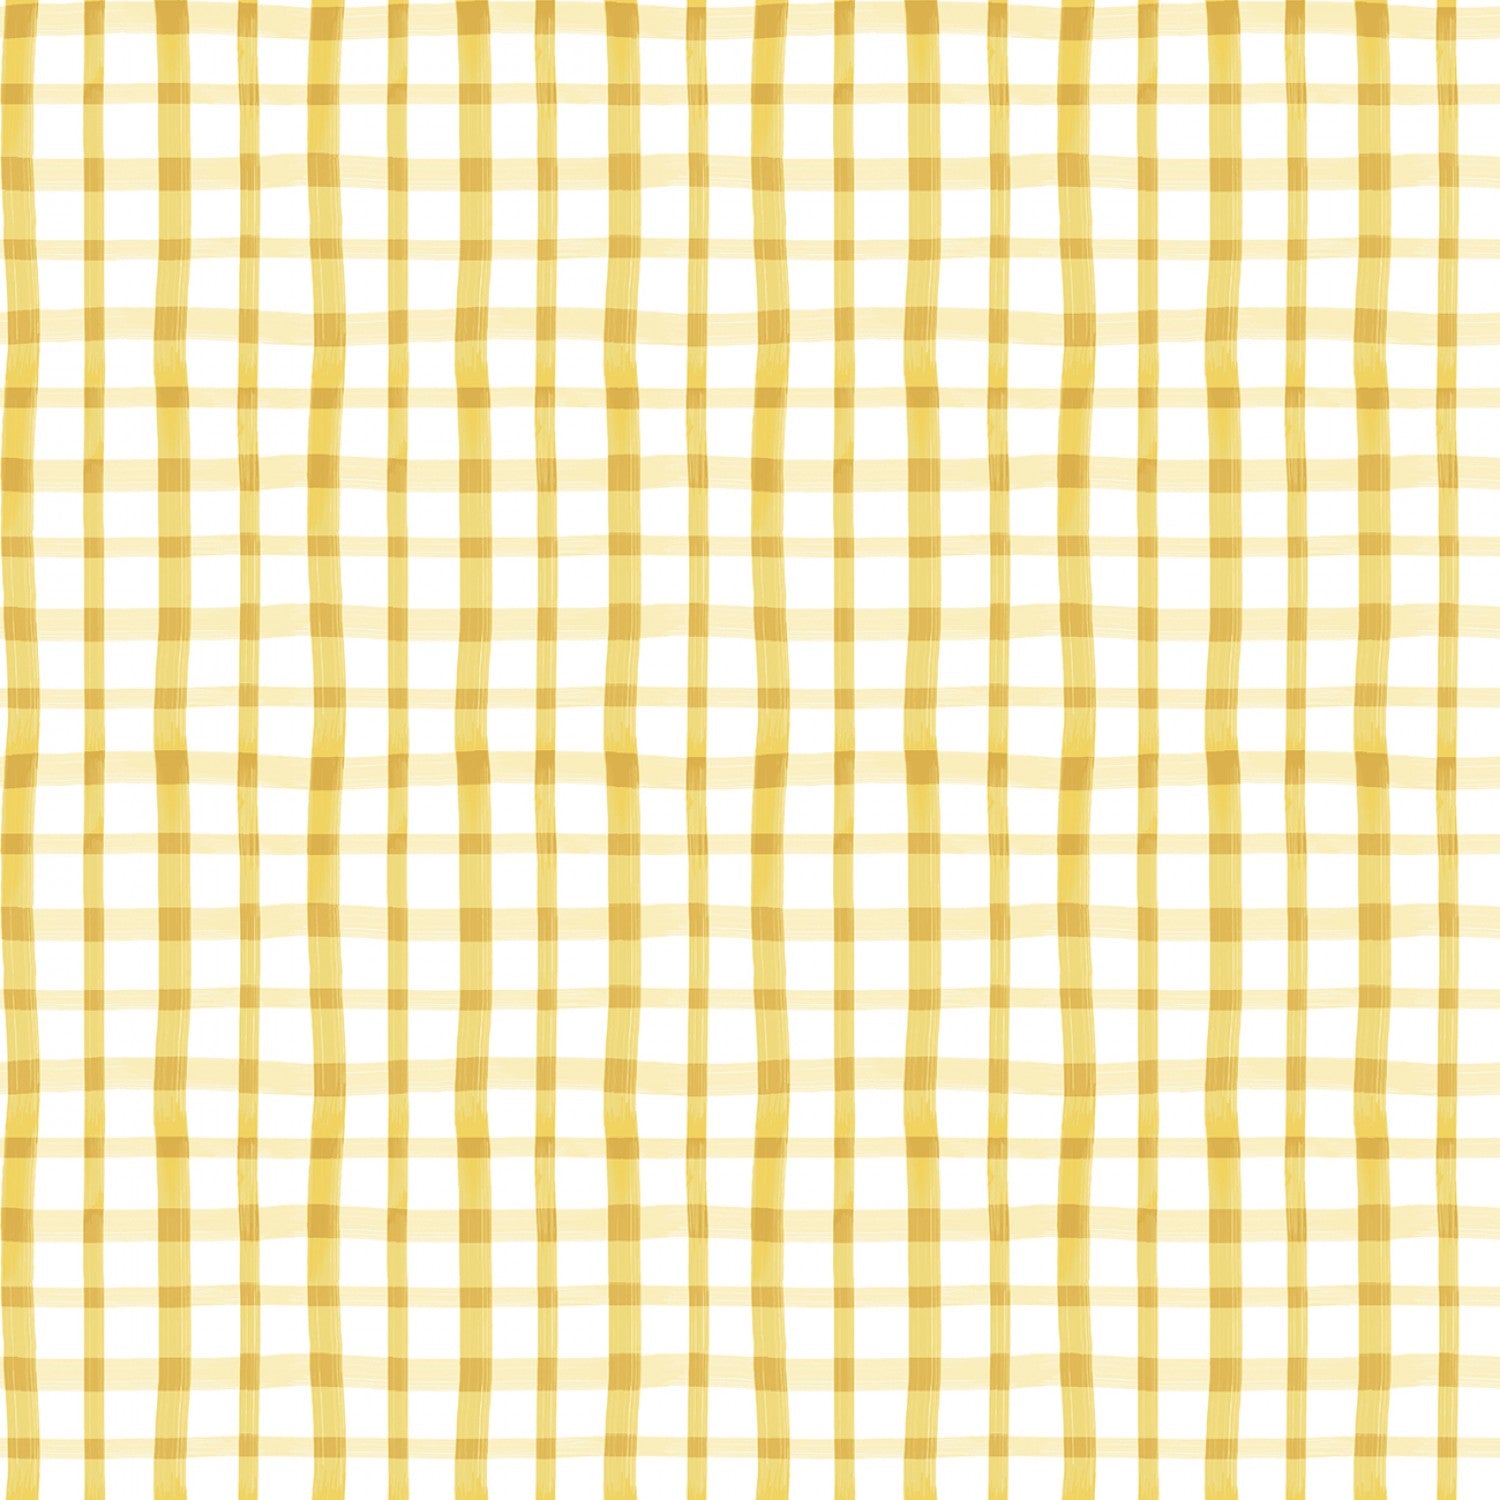 Sweet Plaid in Yellow - Weave & Woven